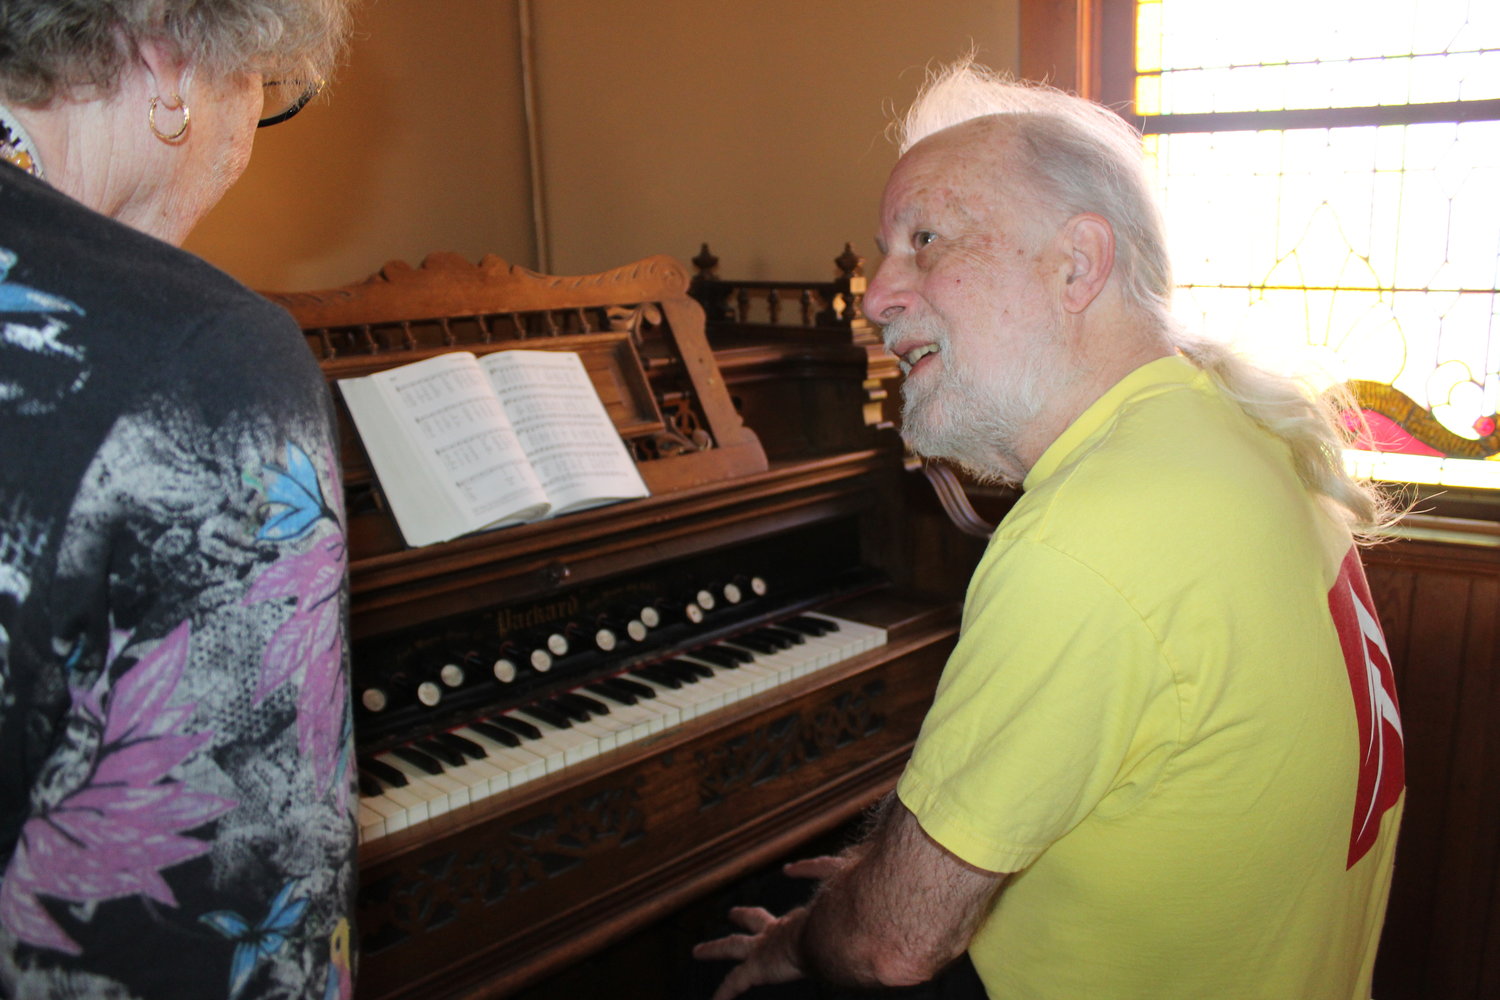 Minnesota Public Radio host Michael Barone took some time to visit the antique reed organ at the Lake Vermilion Cultural Center last weekend. Barone is the host of the nationally-syndicated organ music program “Pipedreams.”